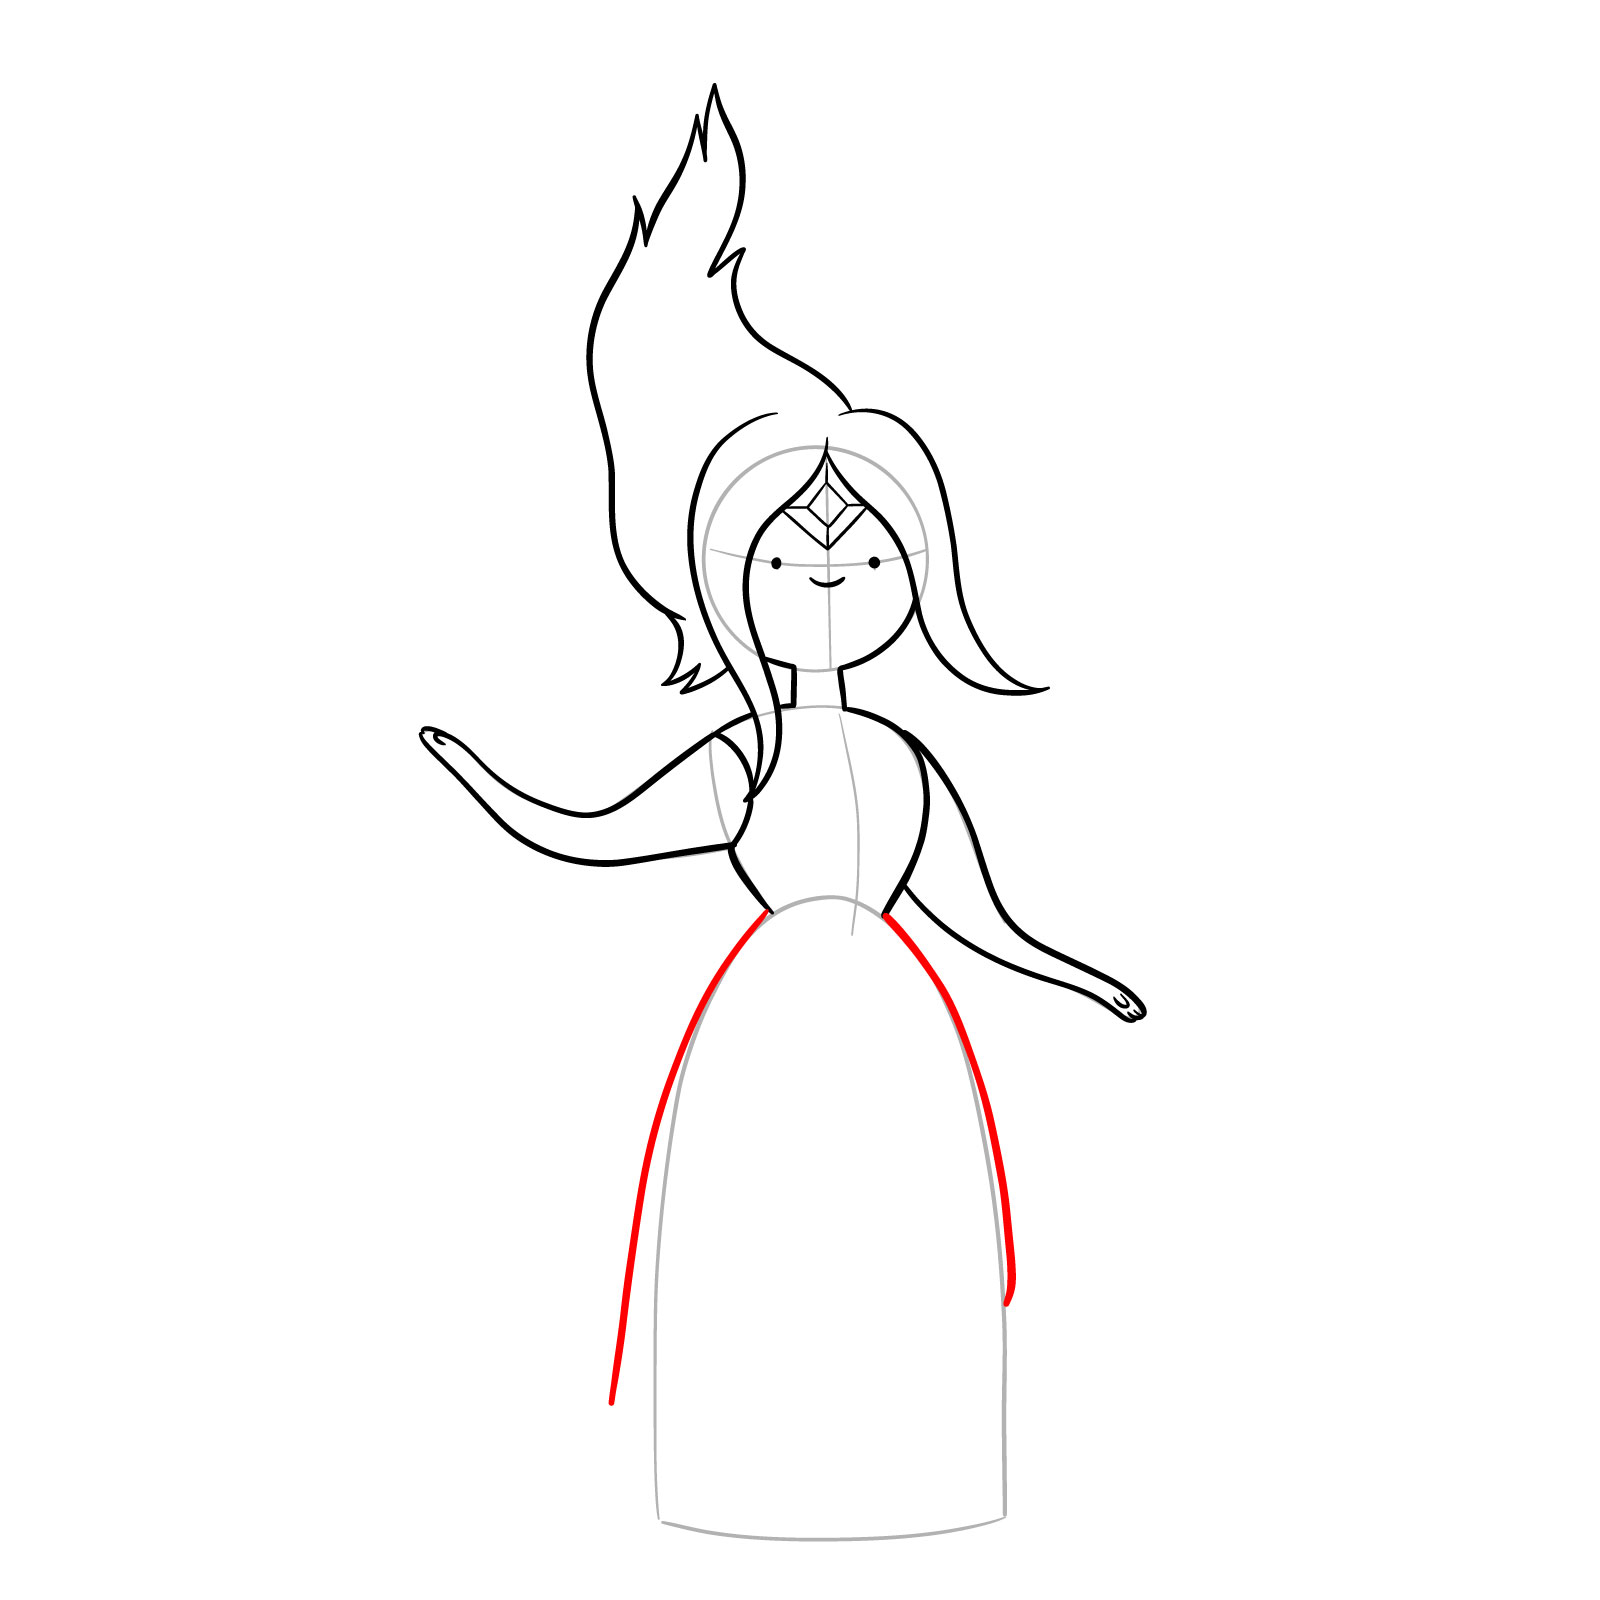 How to draw Flame Princess from Incendium Episode - step 13